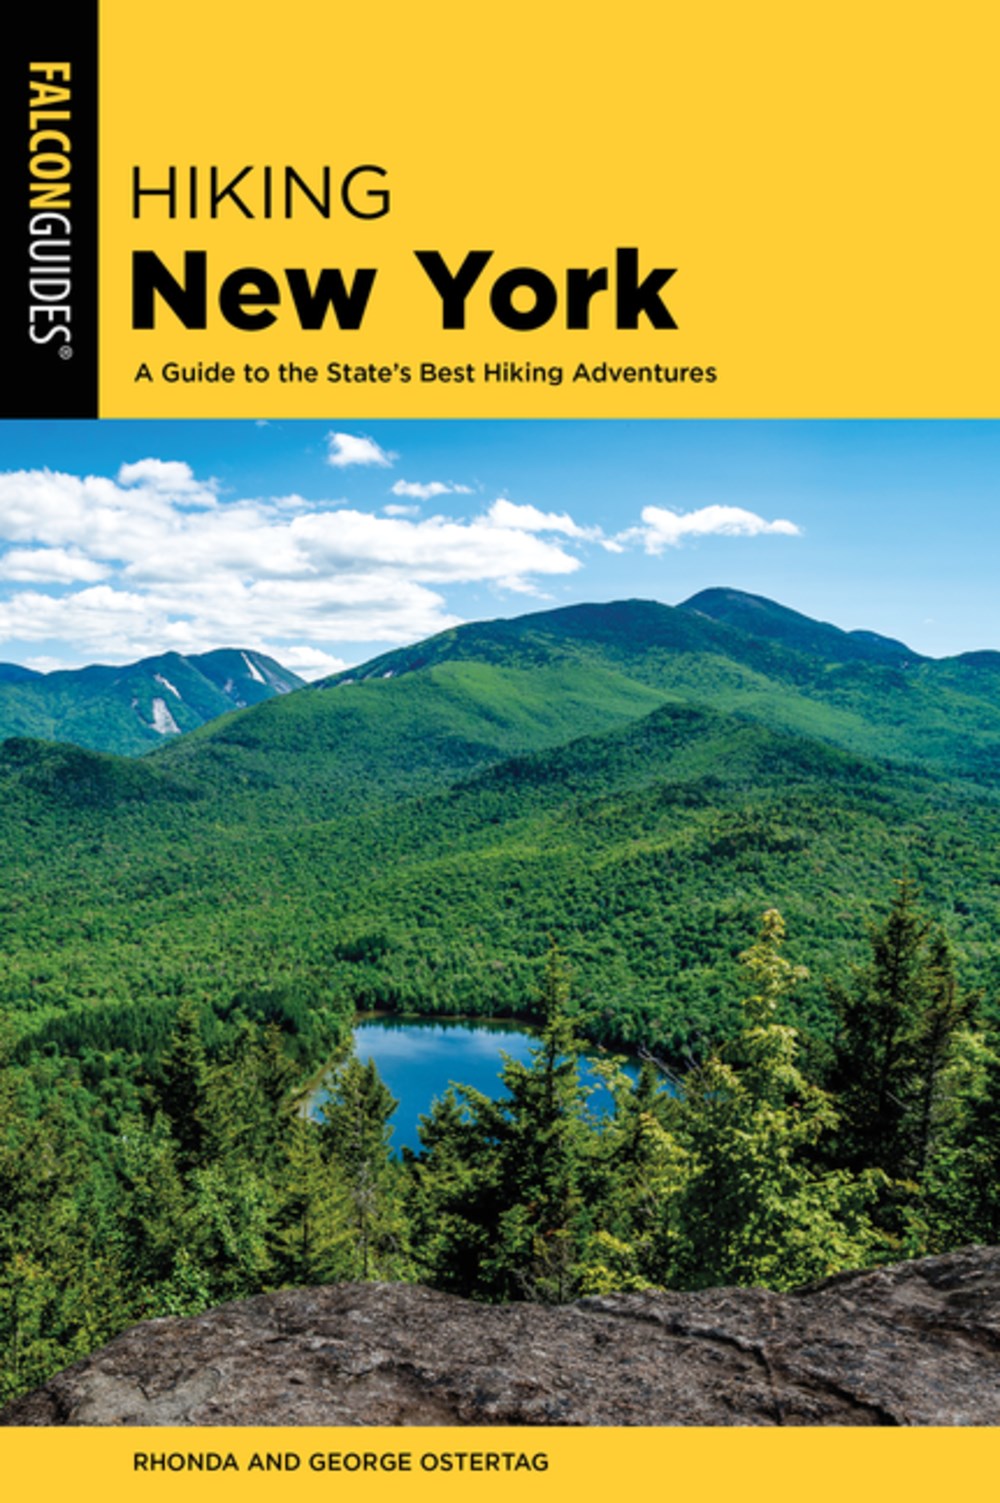 Hiking New York: A Guide To The State's Best Hiking Adventures (4th Edition)